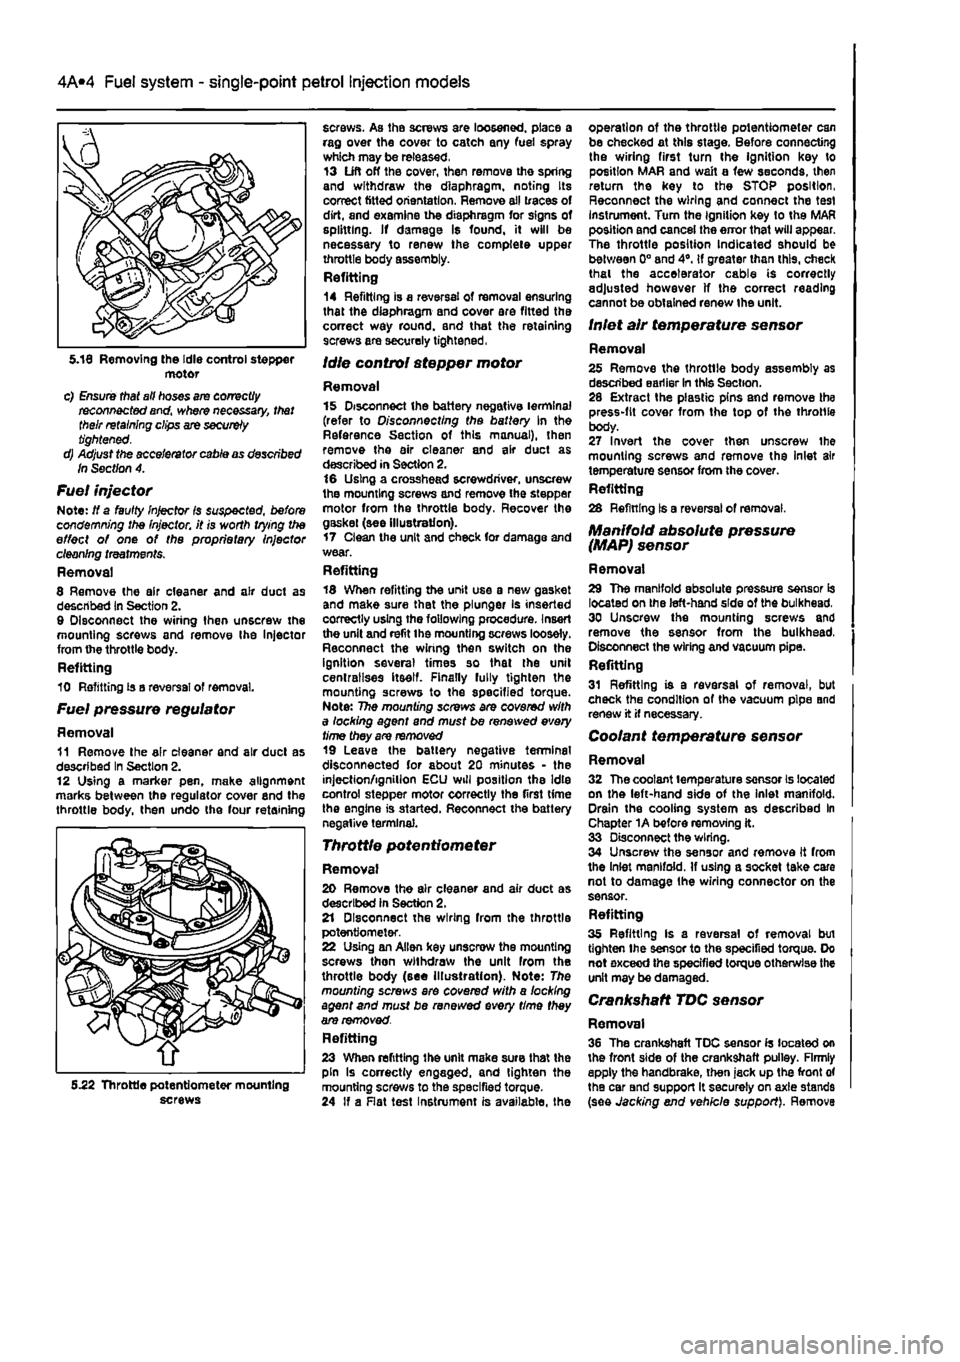 FIAT PUNTO 1996 176 / 1.G Service Manual 
4A*2 Fuel system - single-point petrol Injection models 
motor c) Ensure that all hoses are correctly reconnected and, where necessary, that their retaining clips are securely tightened. d) Adjust th